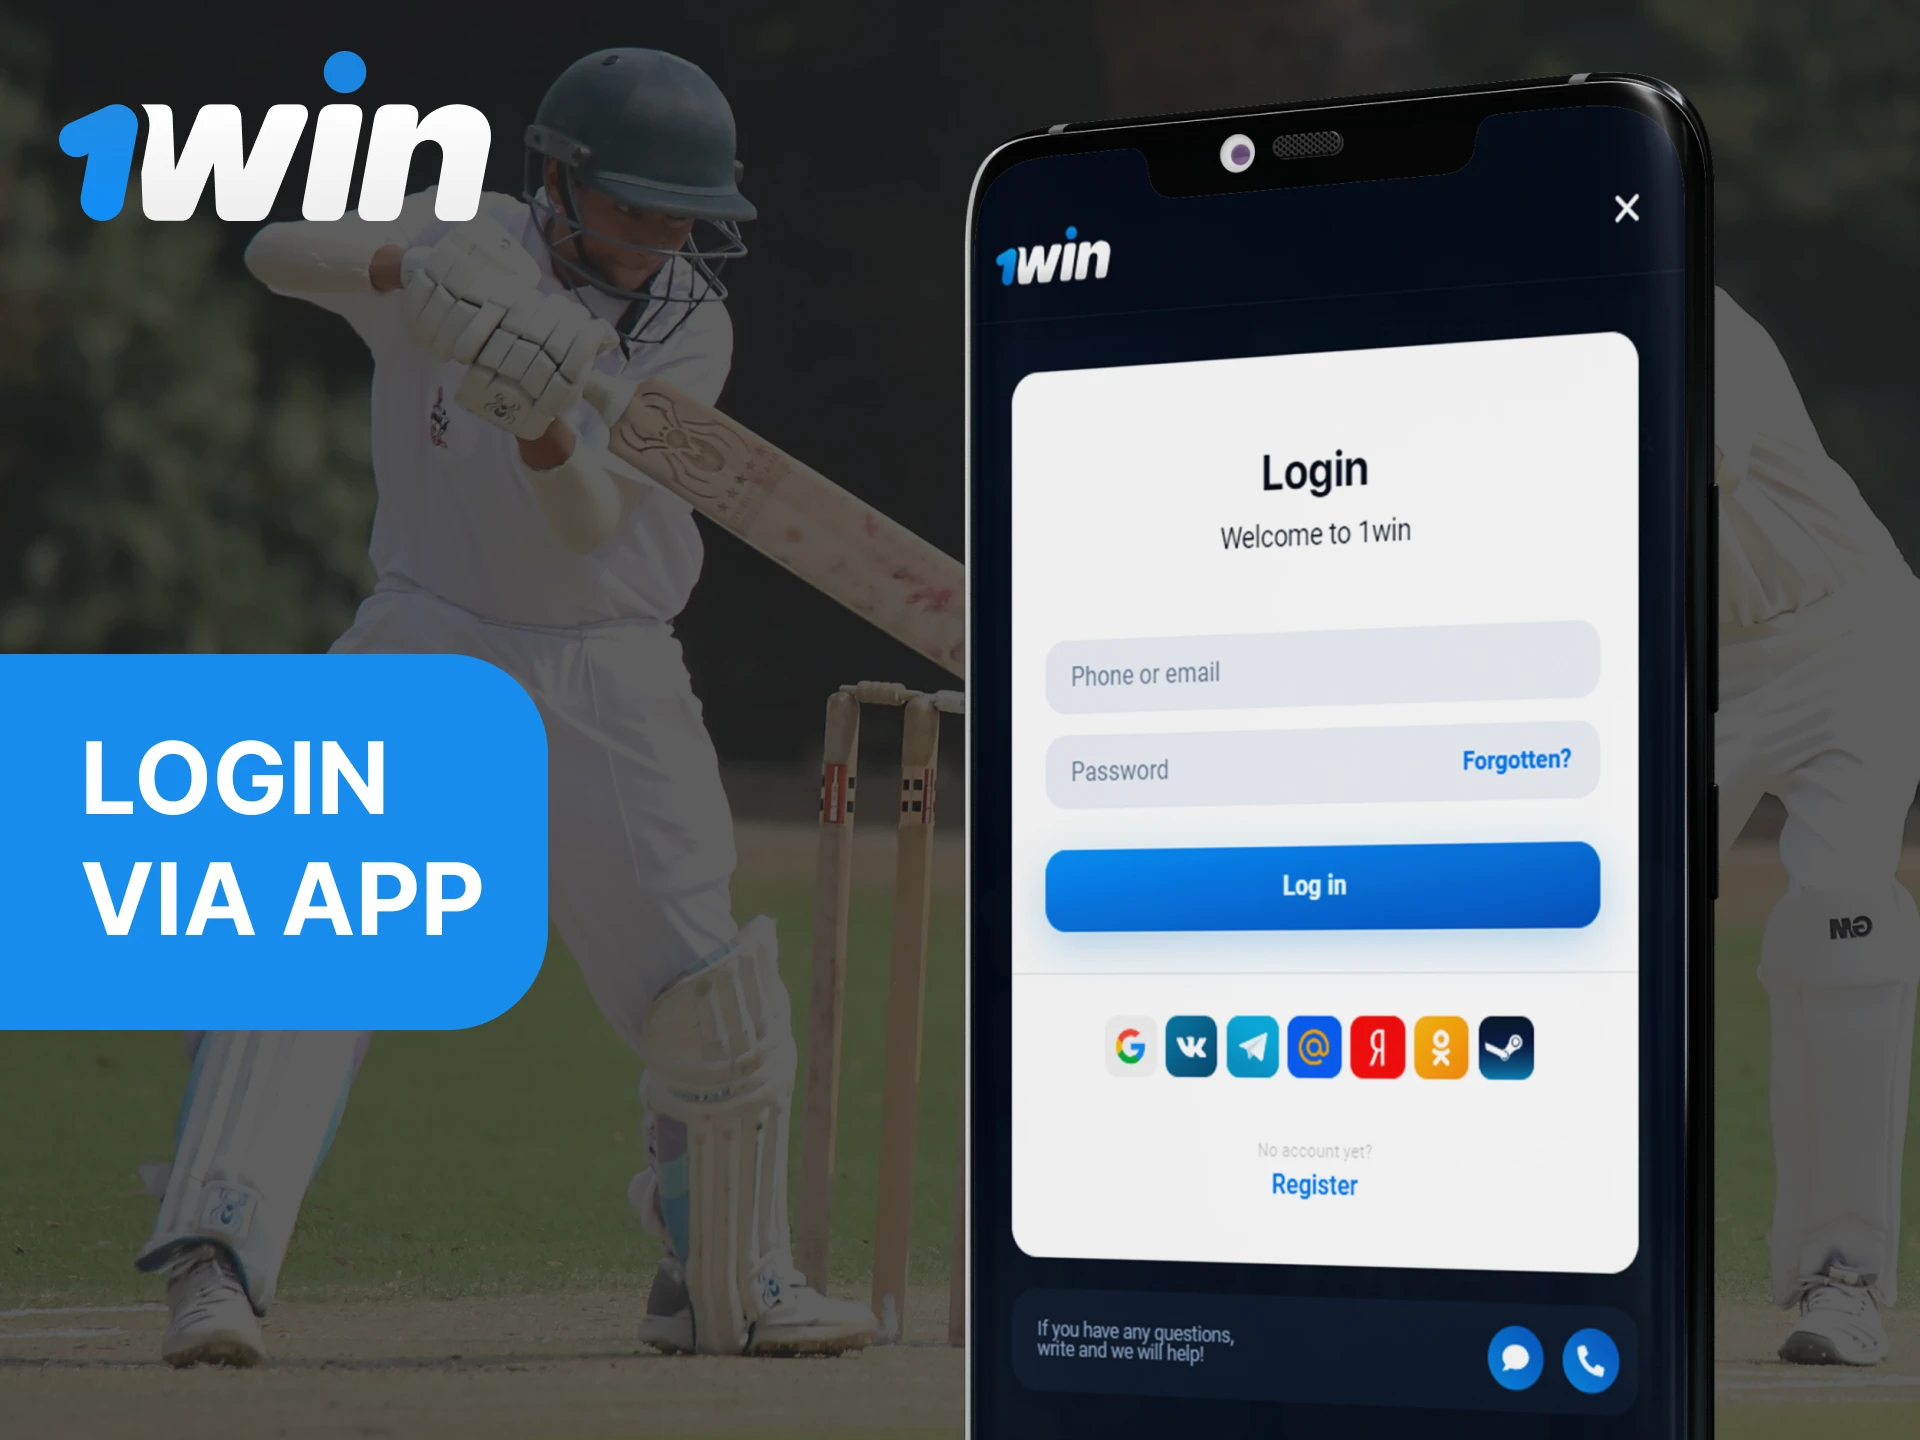 In the 1Win mobile app, you can log into your account.